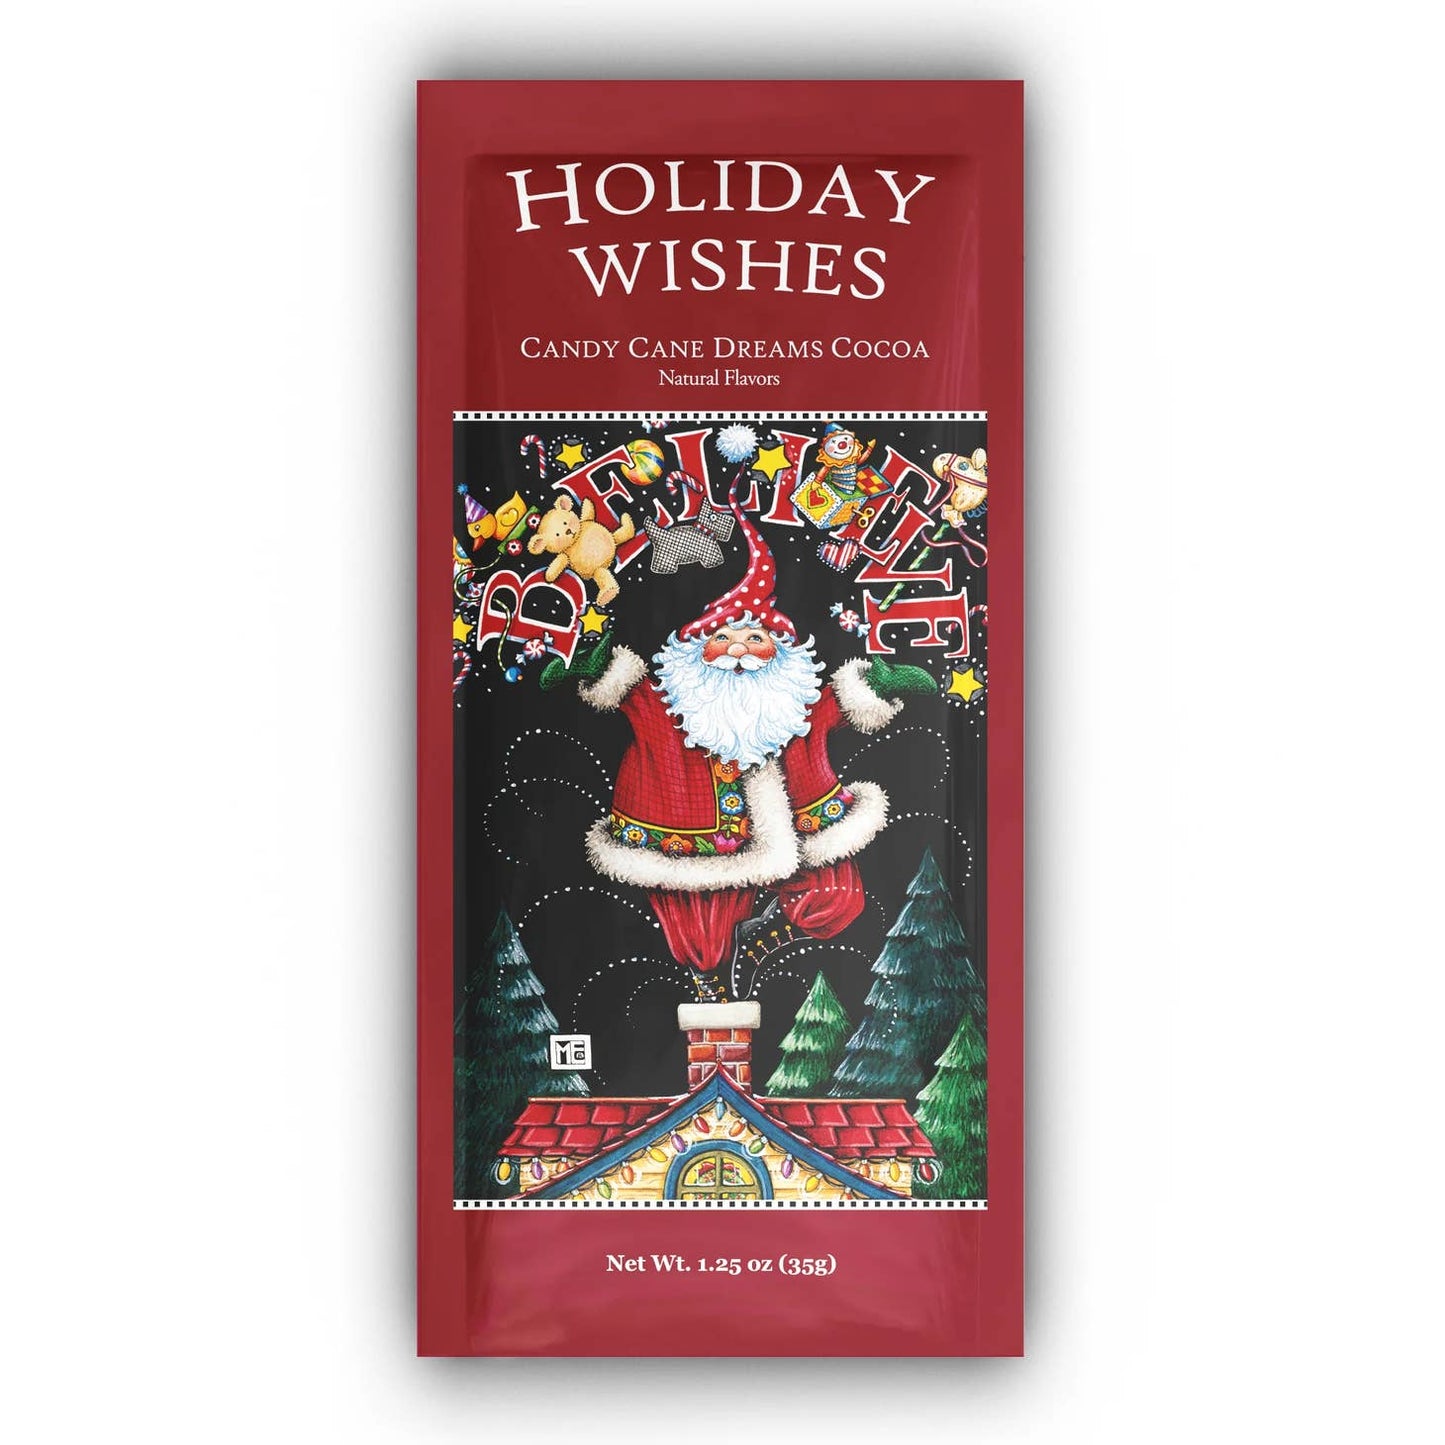 santa holiday wishes candy cane cocoa packet with santa and the word believe on the front